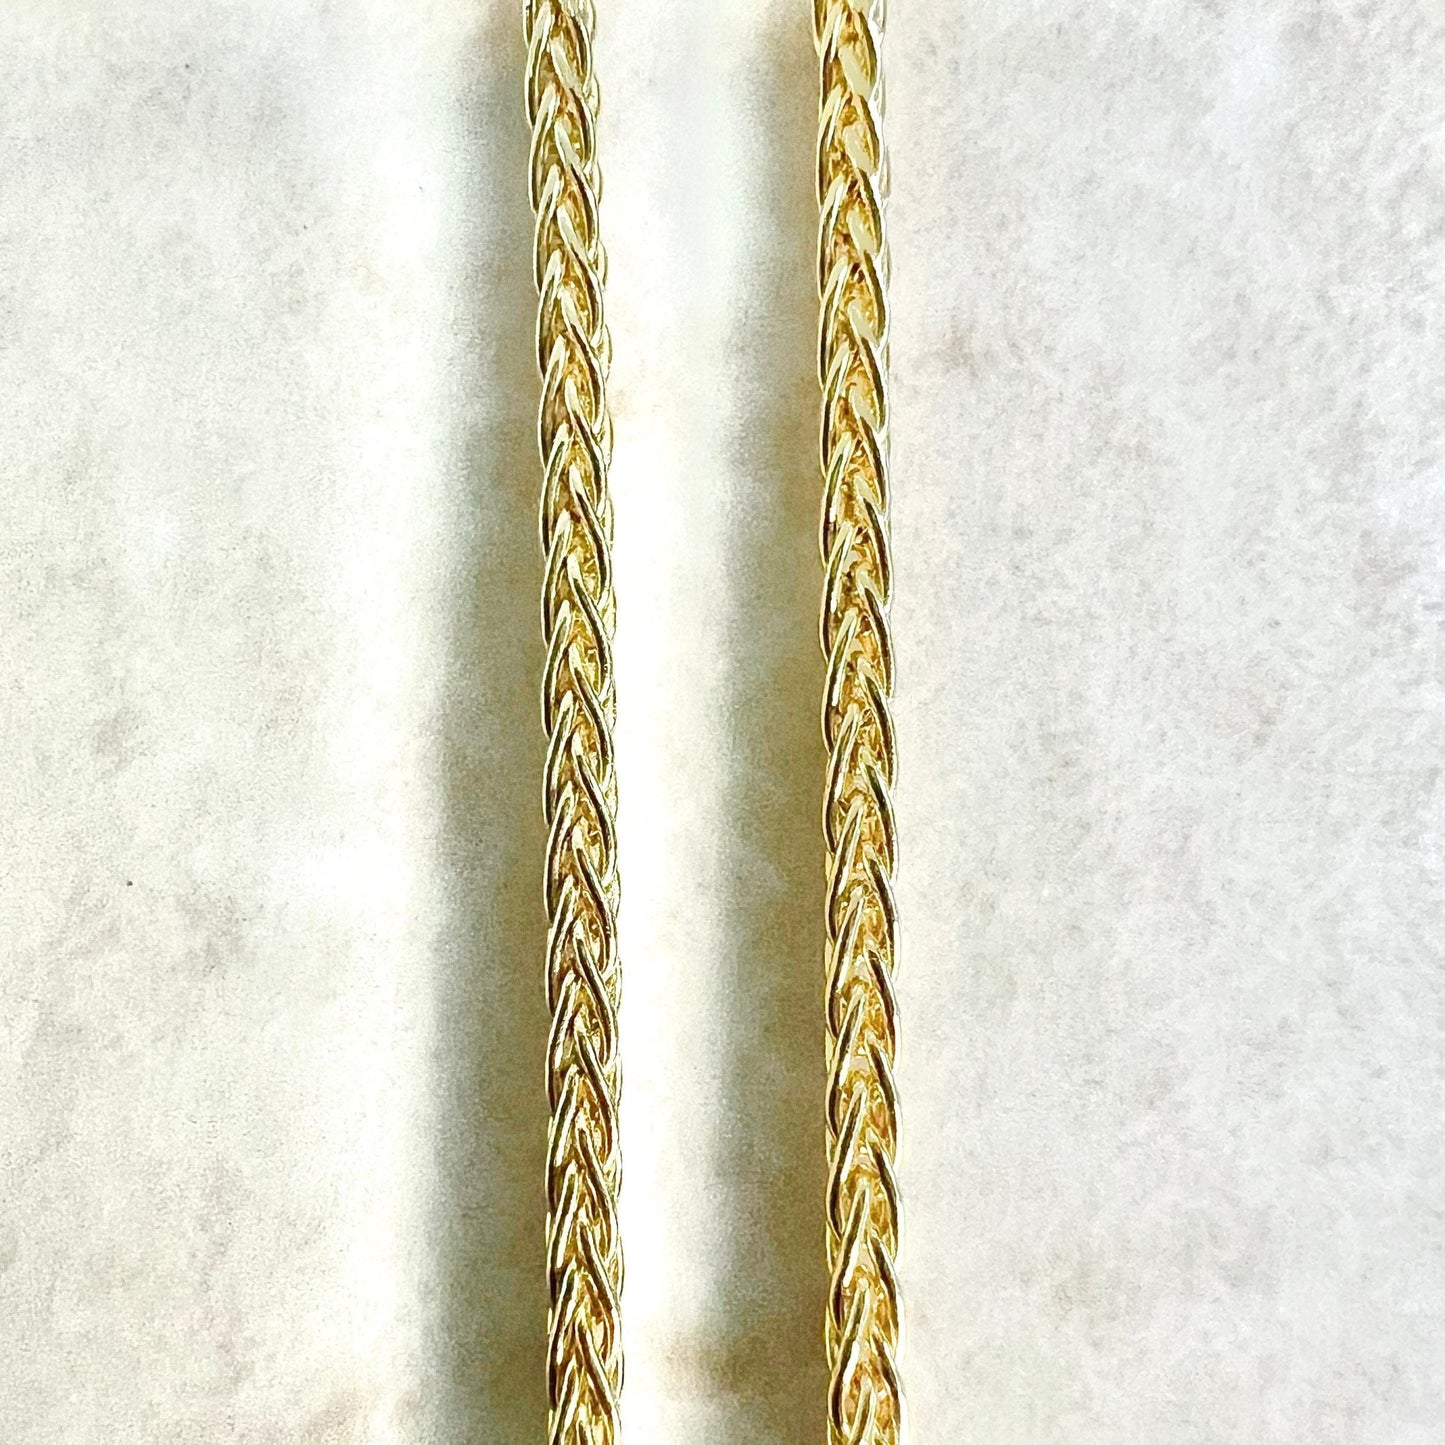 Vintage Italian 14K Gold Wheat Chain Necklace - 20 Inch Gold Chain Necklace - 14K Yellow Gold Necklace - 14K Solid Gold Chain - Gift For Her